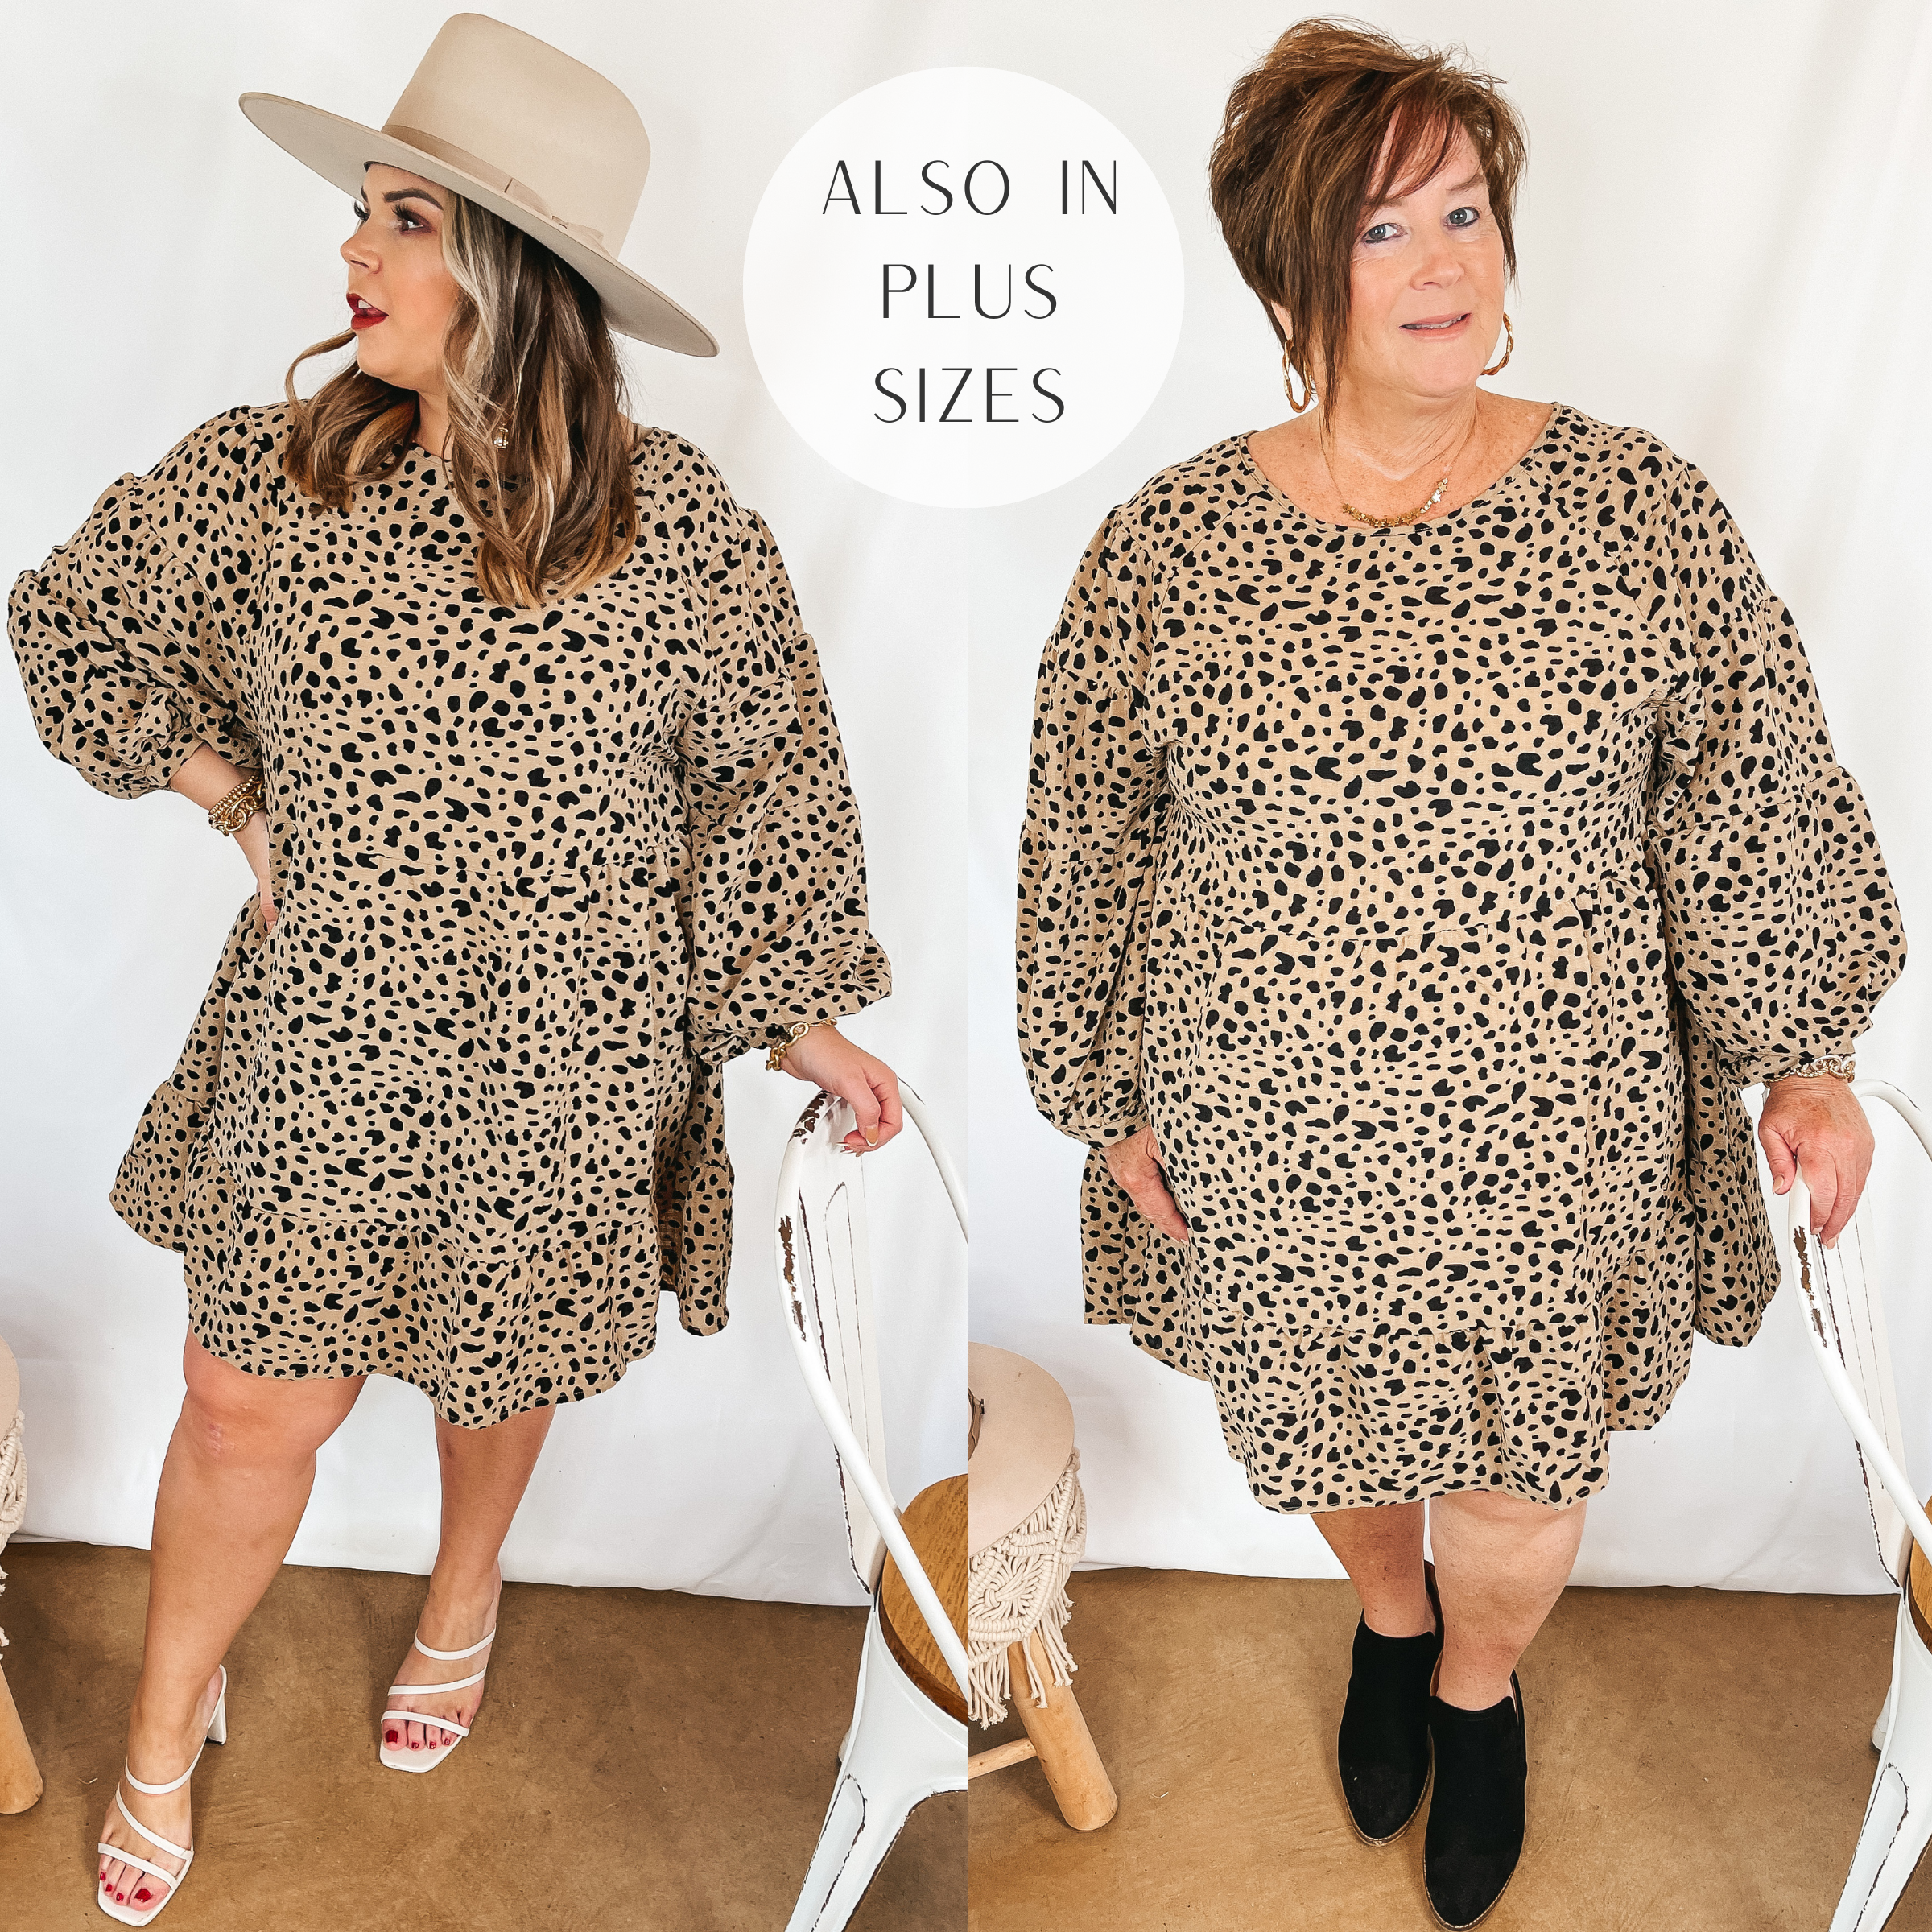 Models are wearing a taupe long sleeve dress that has a black dotted print. Size large model has it paired with a beige hat and white heels. Plus size model has it paired with black booties and gold jewelry.